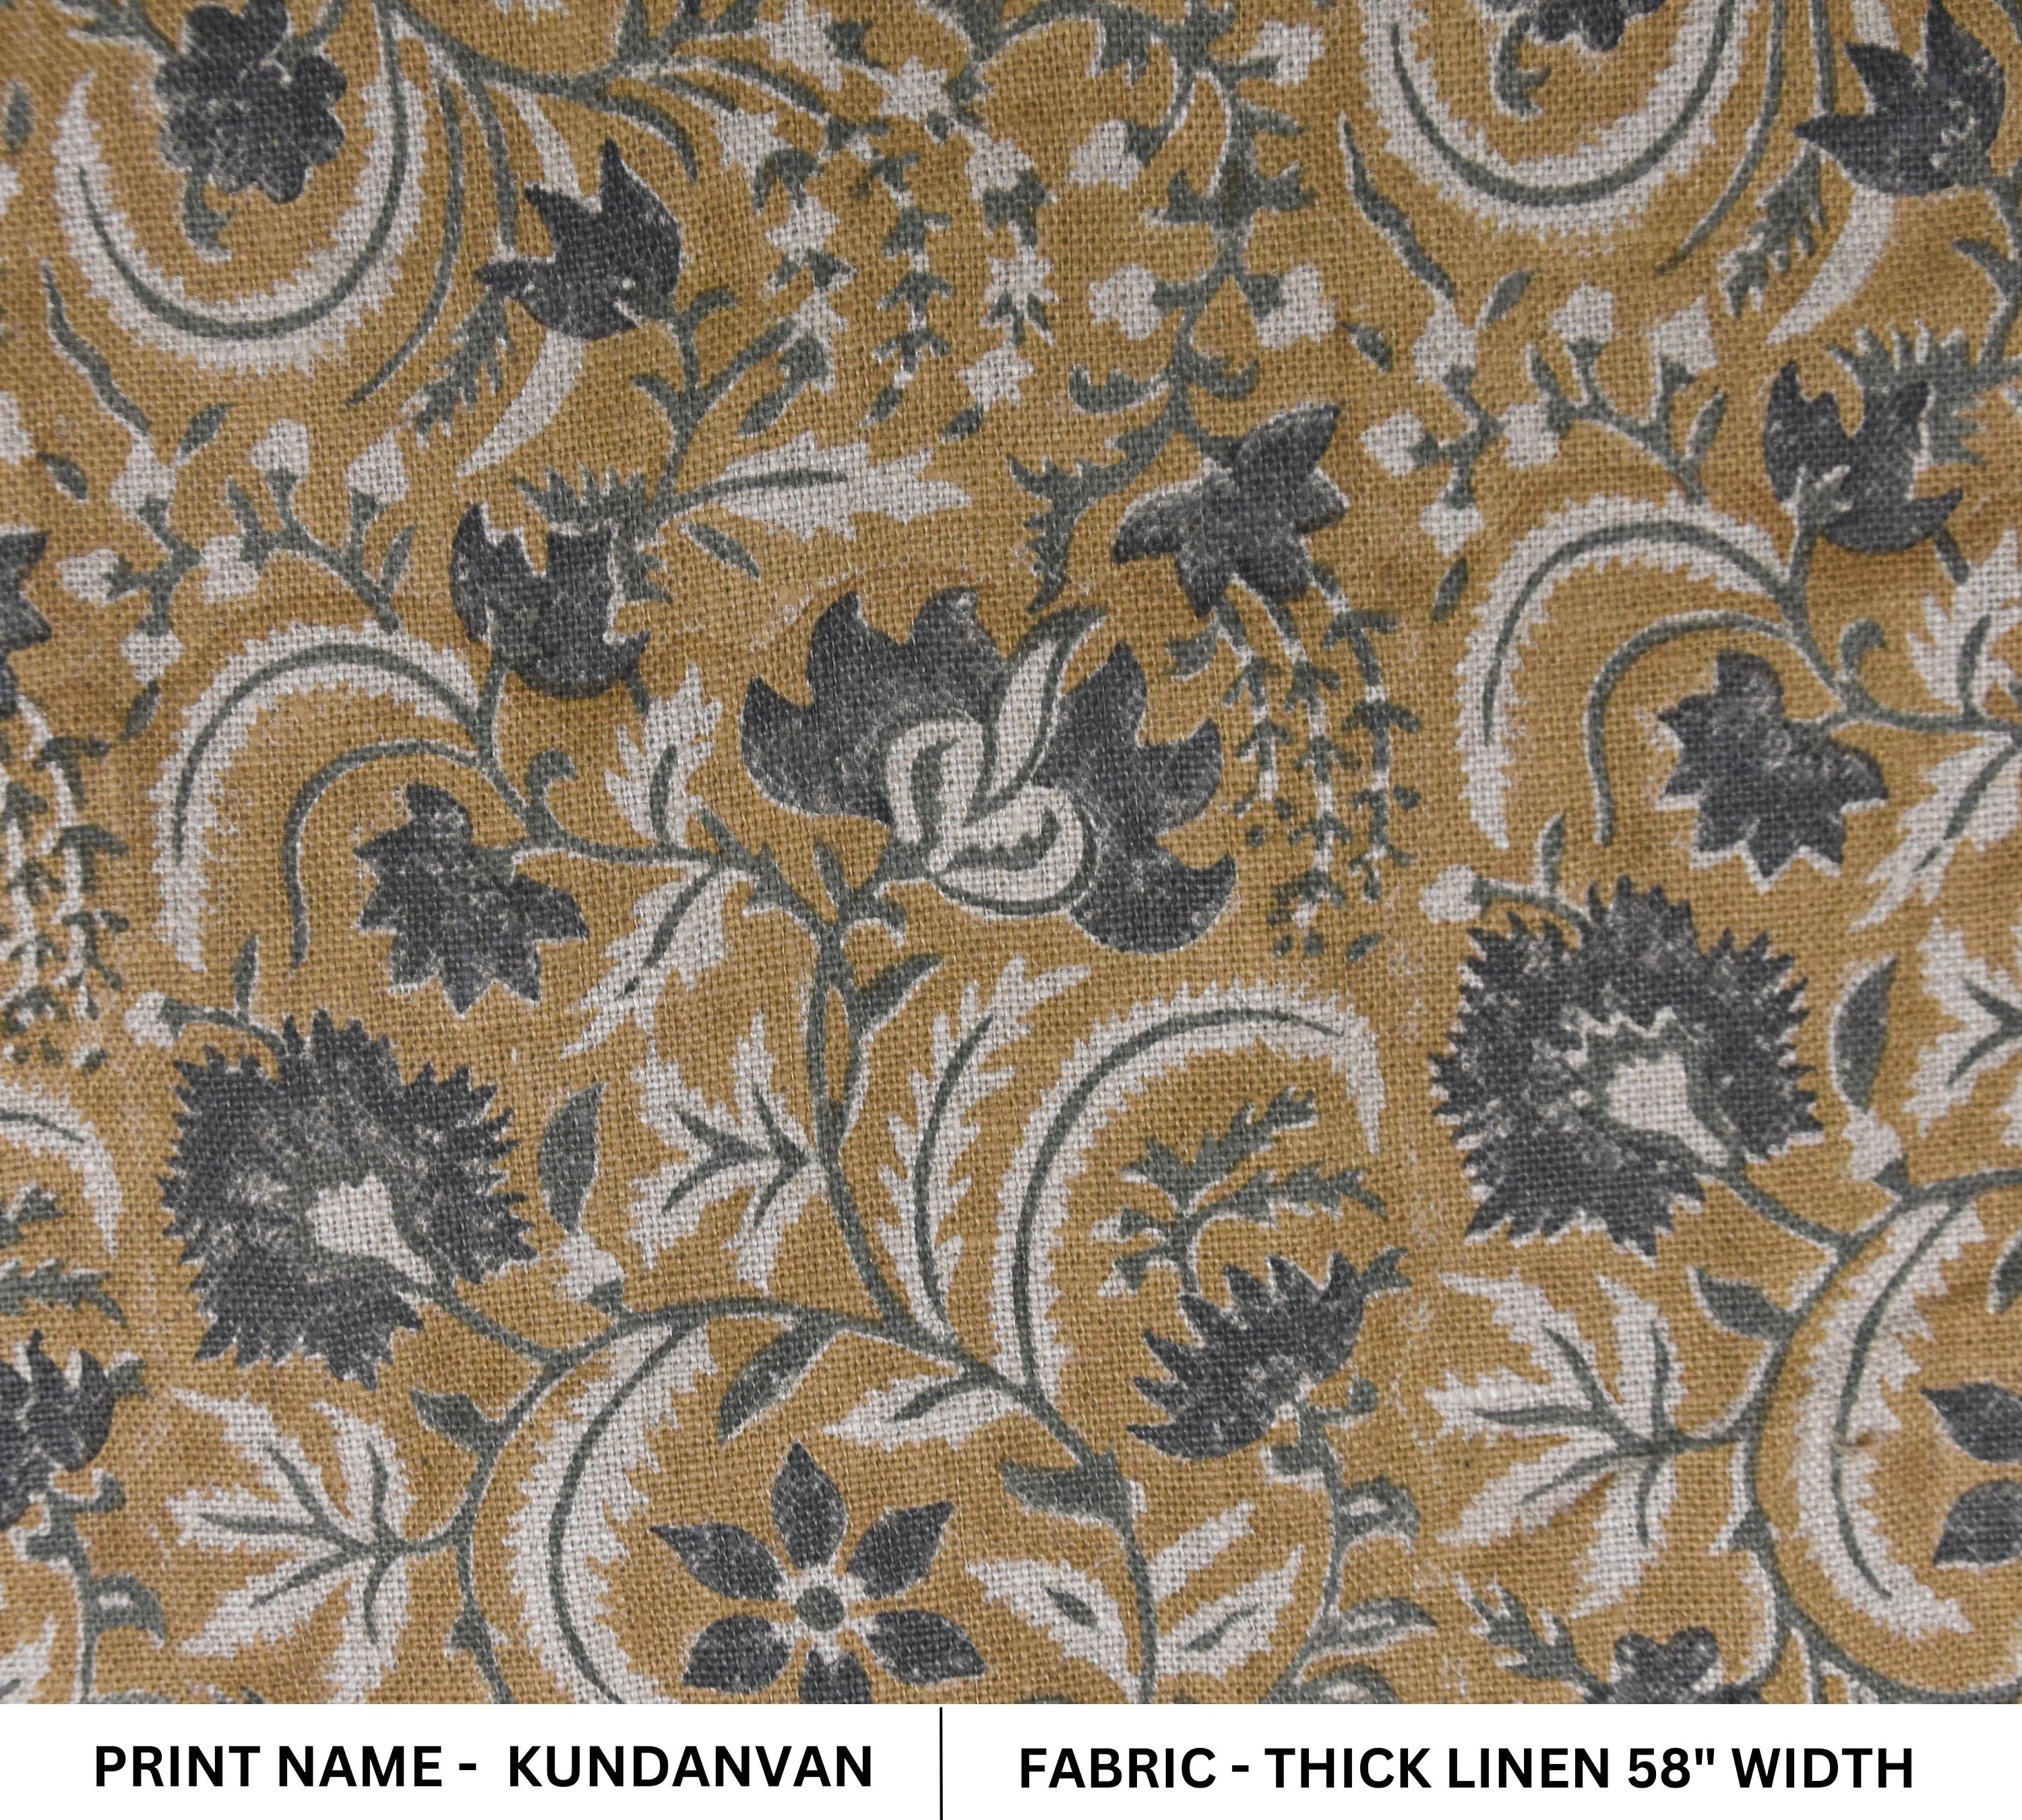 Hand block floral print, Thick linen 58" wide, linen fabric for pillows and cushions covers, handmade art, upholstery curtains - KUNDANVAN BROWN